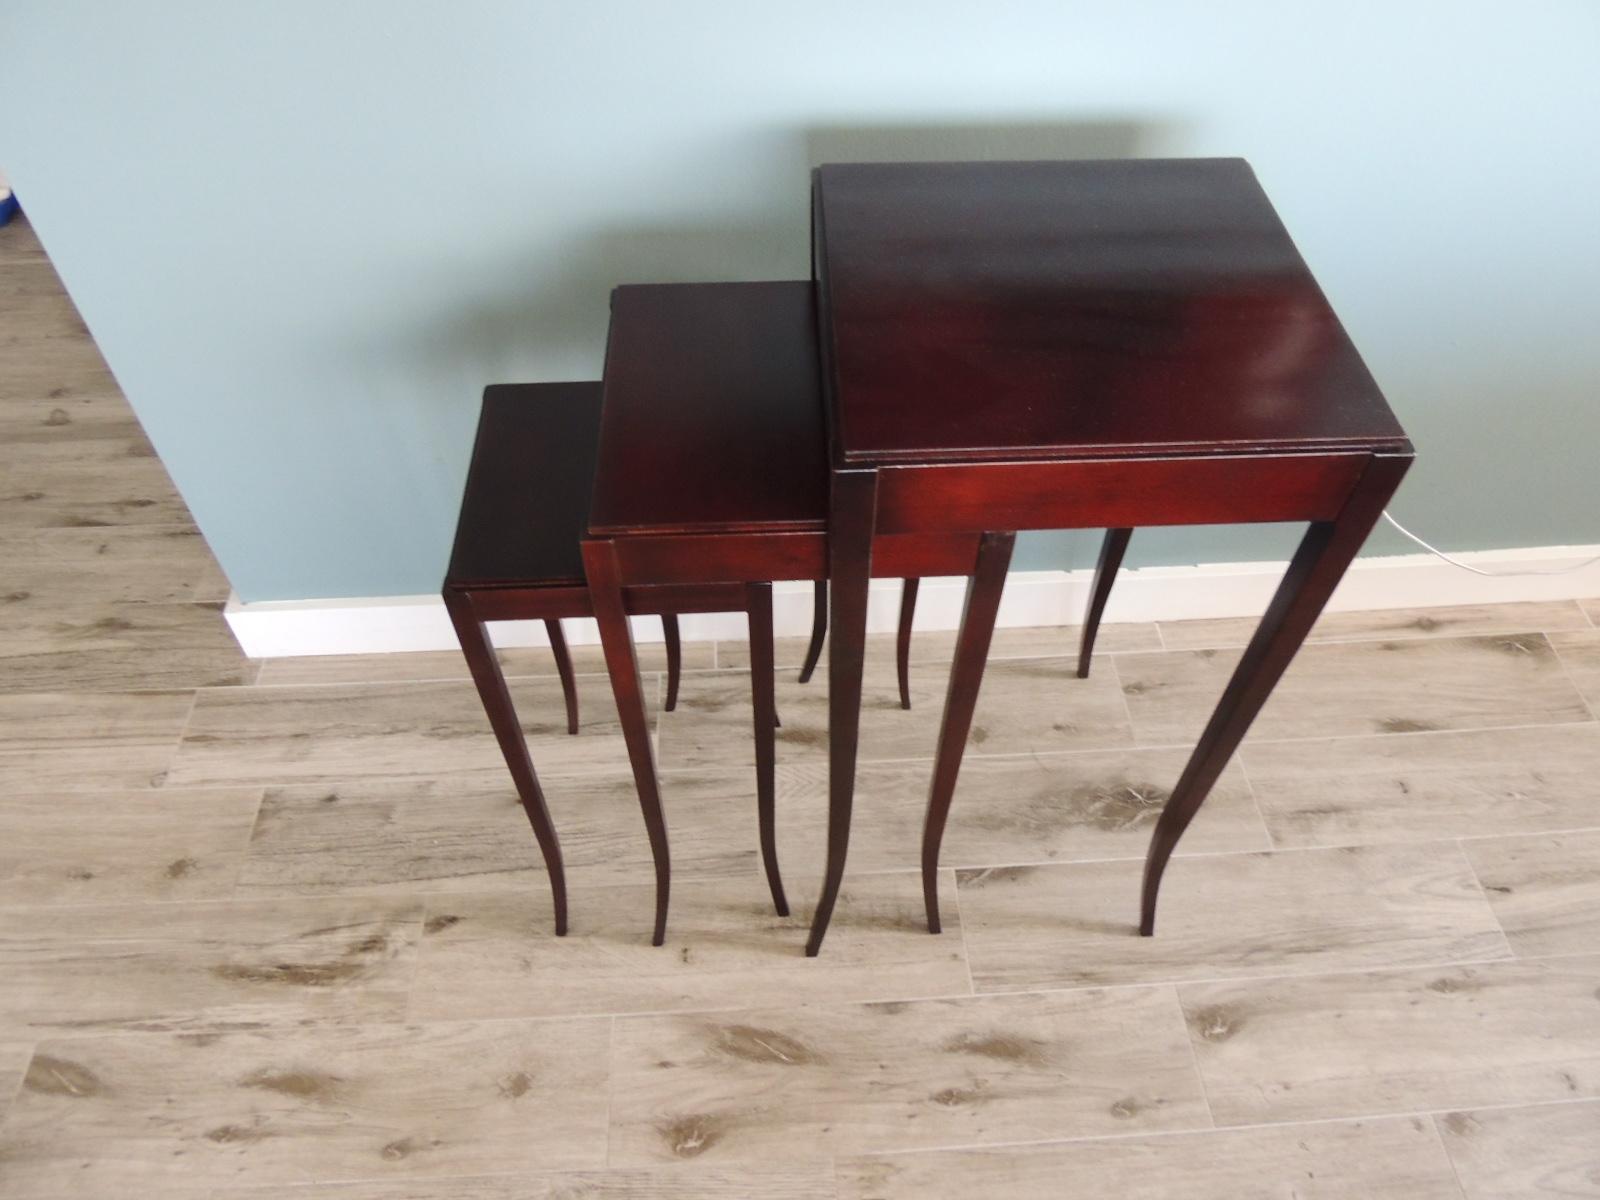 Hand-Crafted Set of '3' Nesting Tables by Barbara Barry for Baker Furniture